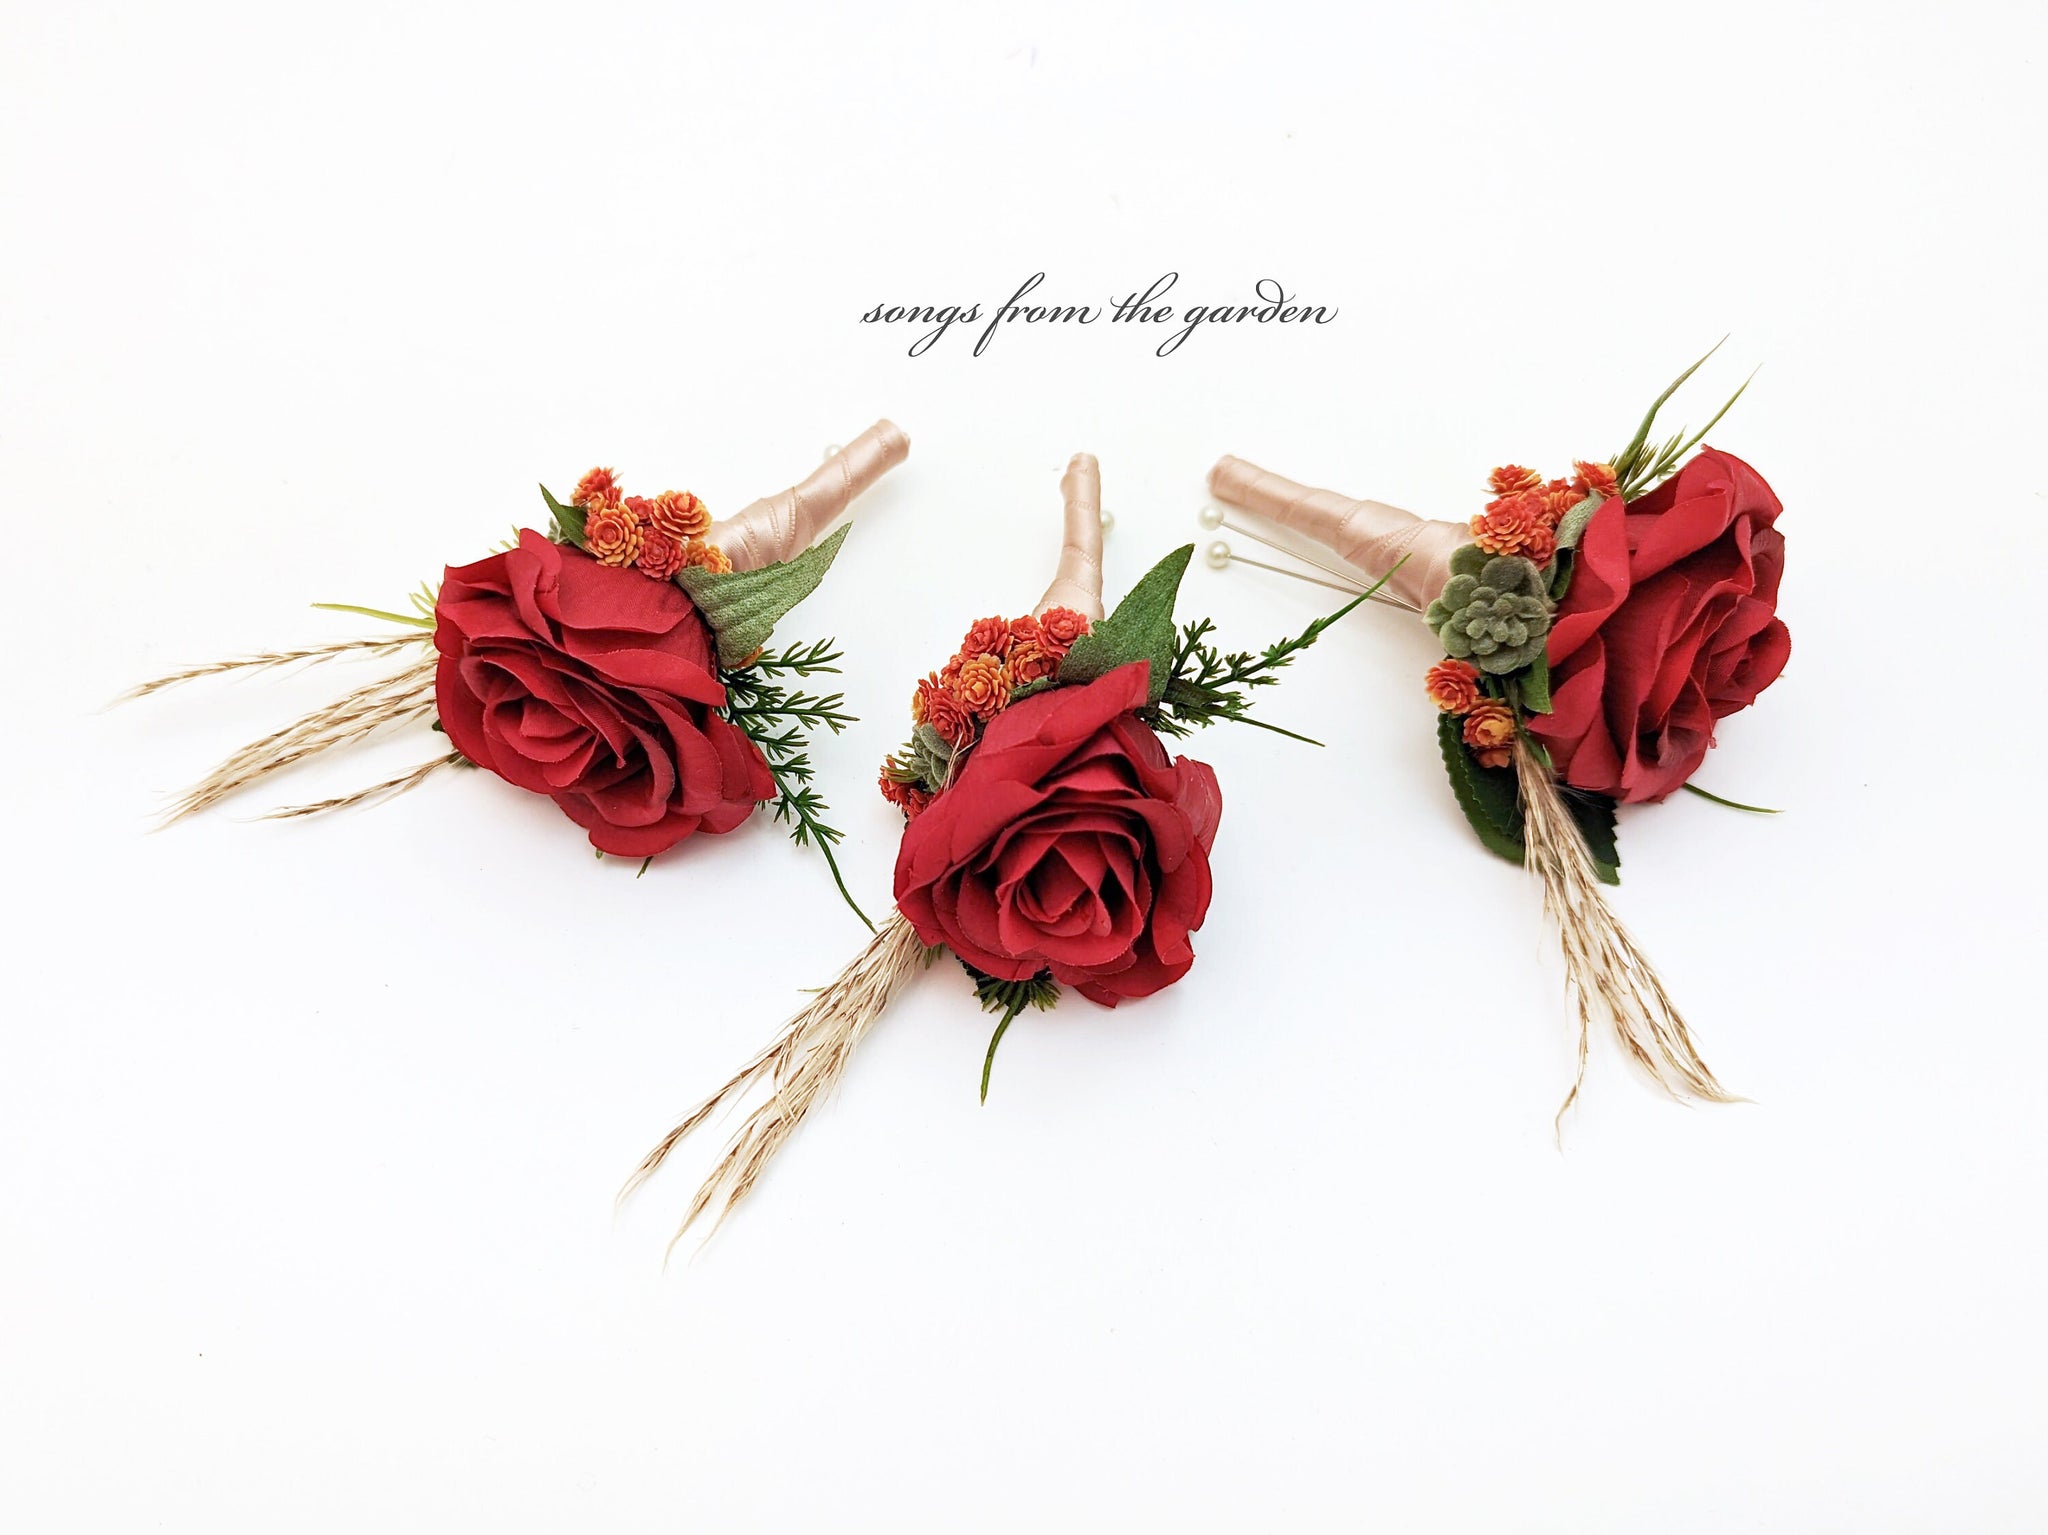 Rose Corsage or Boutionniere with Pampas Grass Succulents Orange Red - Real Touch Rose Wedding Boutonniere Corsage Homecoming Prom Corsage